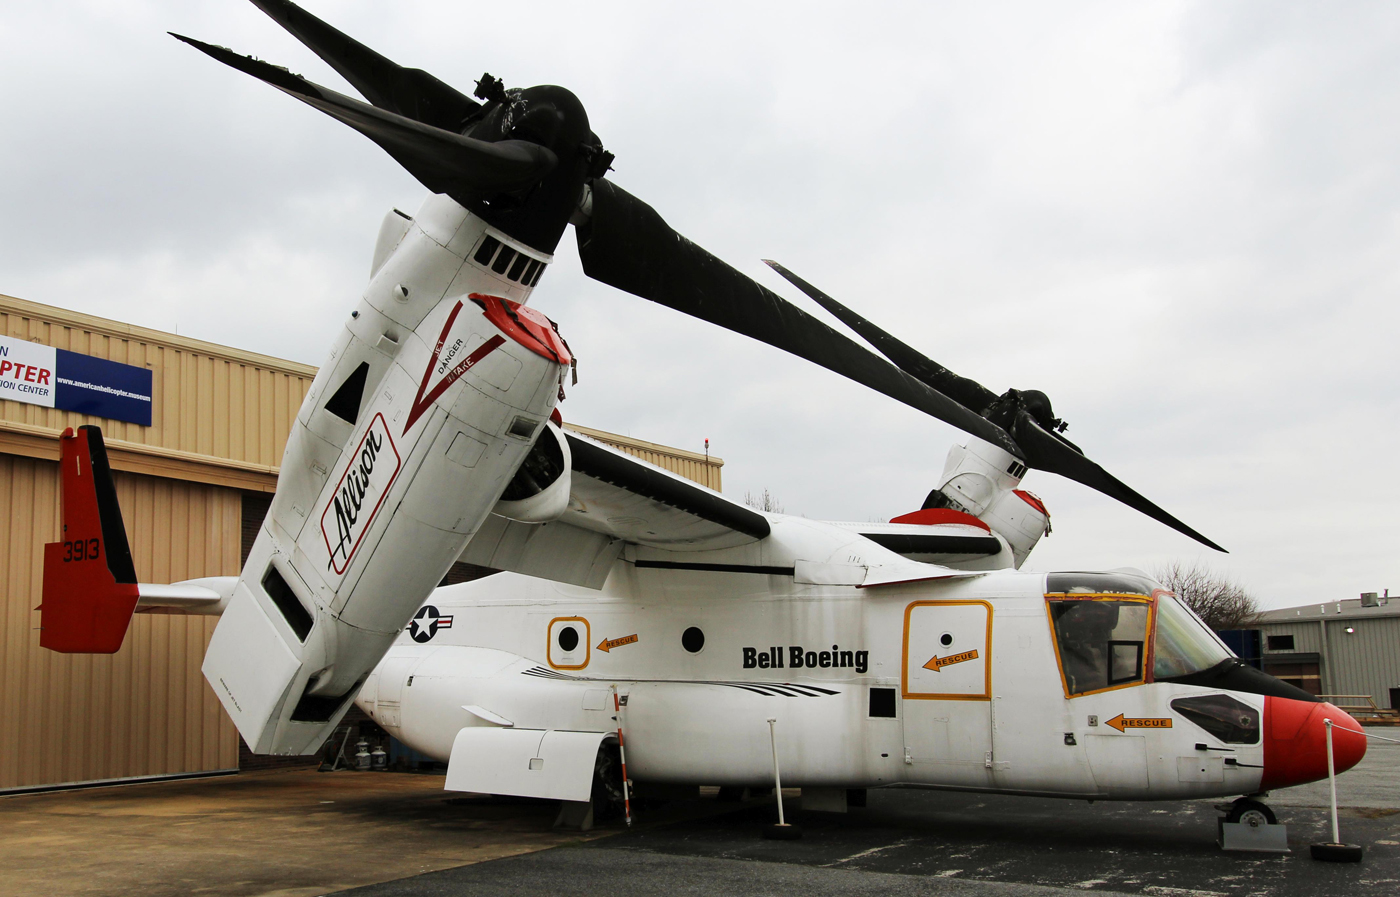 Six of the American Helicopter Museum's helicopters are available for adoption, including this Bell-Boeing V-22 Osprey. American Helicopter Museum Photo